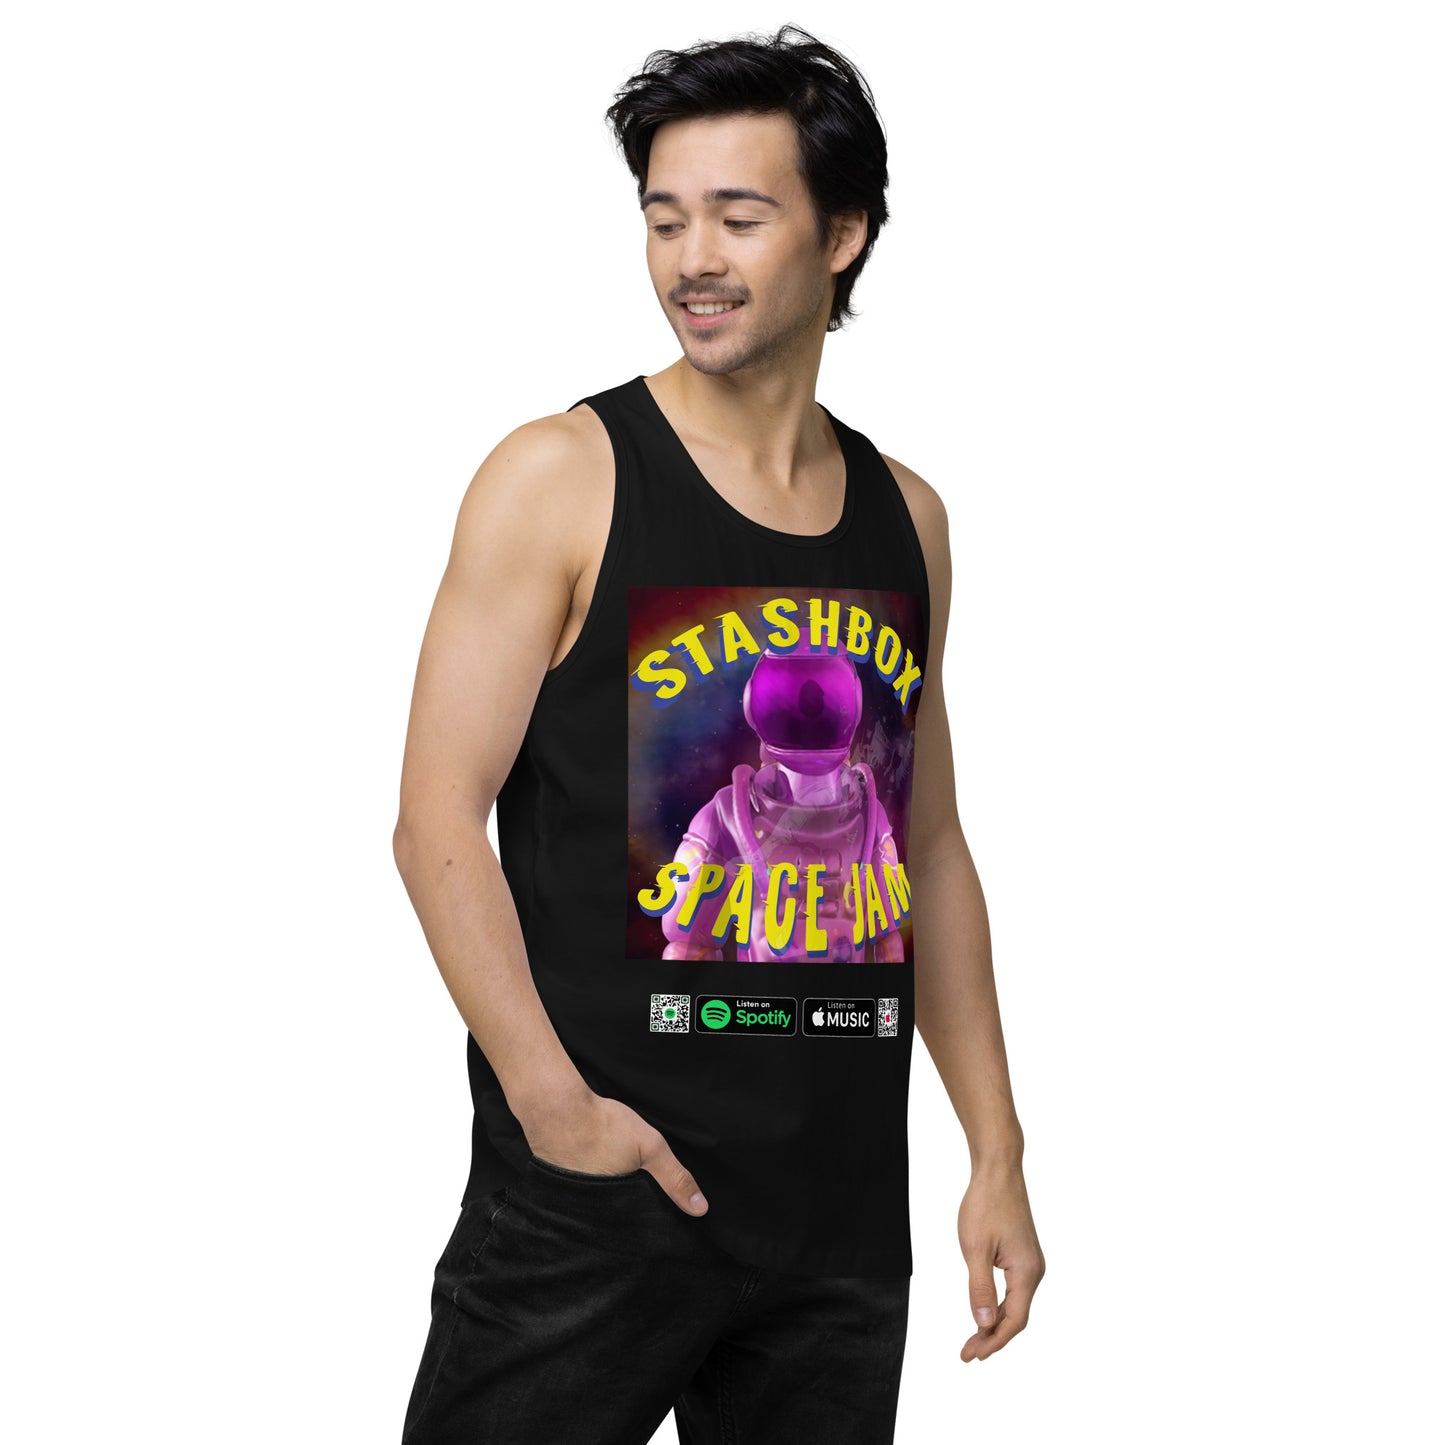 Galactic Comfort: Space Jam - Stashbox Men’s Premium Tank Top, Artwork #005. Experience out-of-this-world comfort with this cosmic tank. Ideal for stargazers and those who dream beyond the stars. #StashboxSpaceFashion #CosmicVibes #StellarComfort